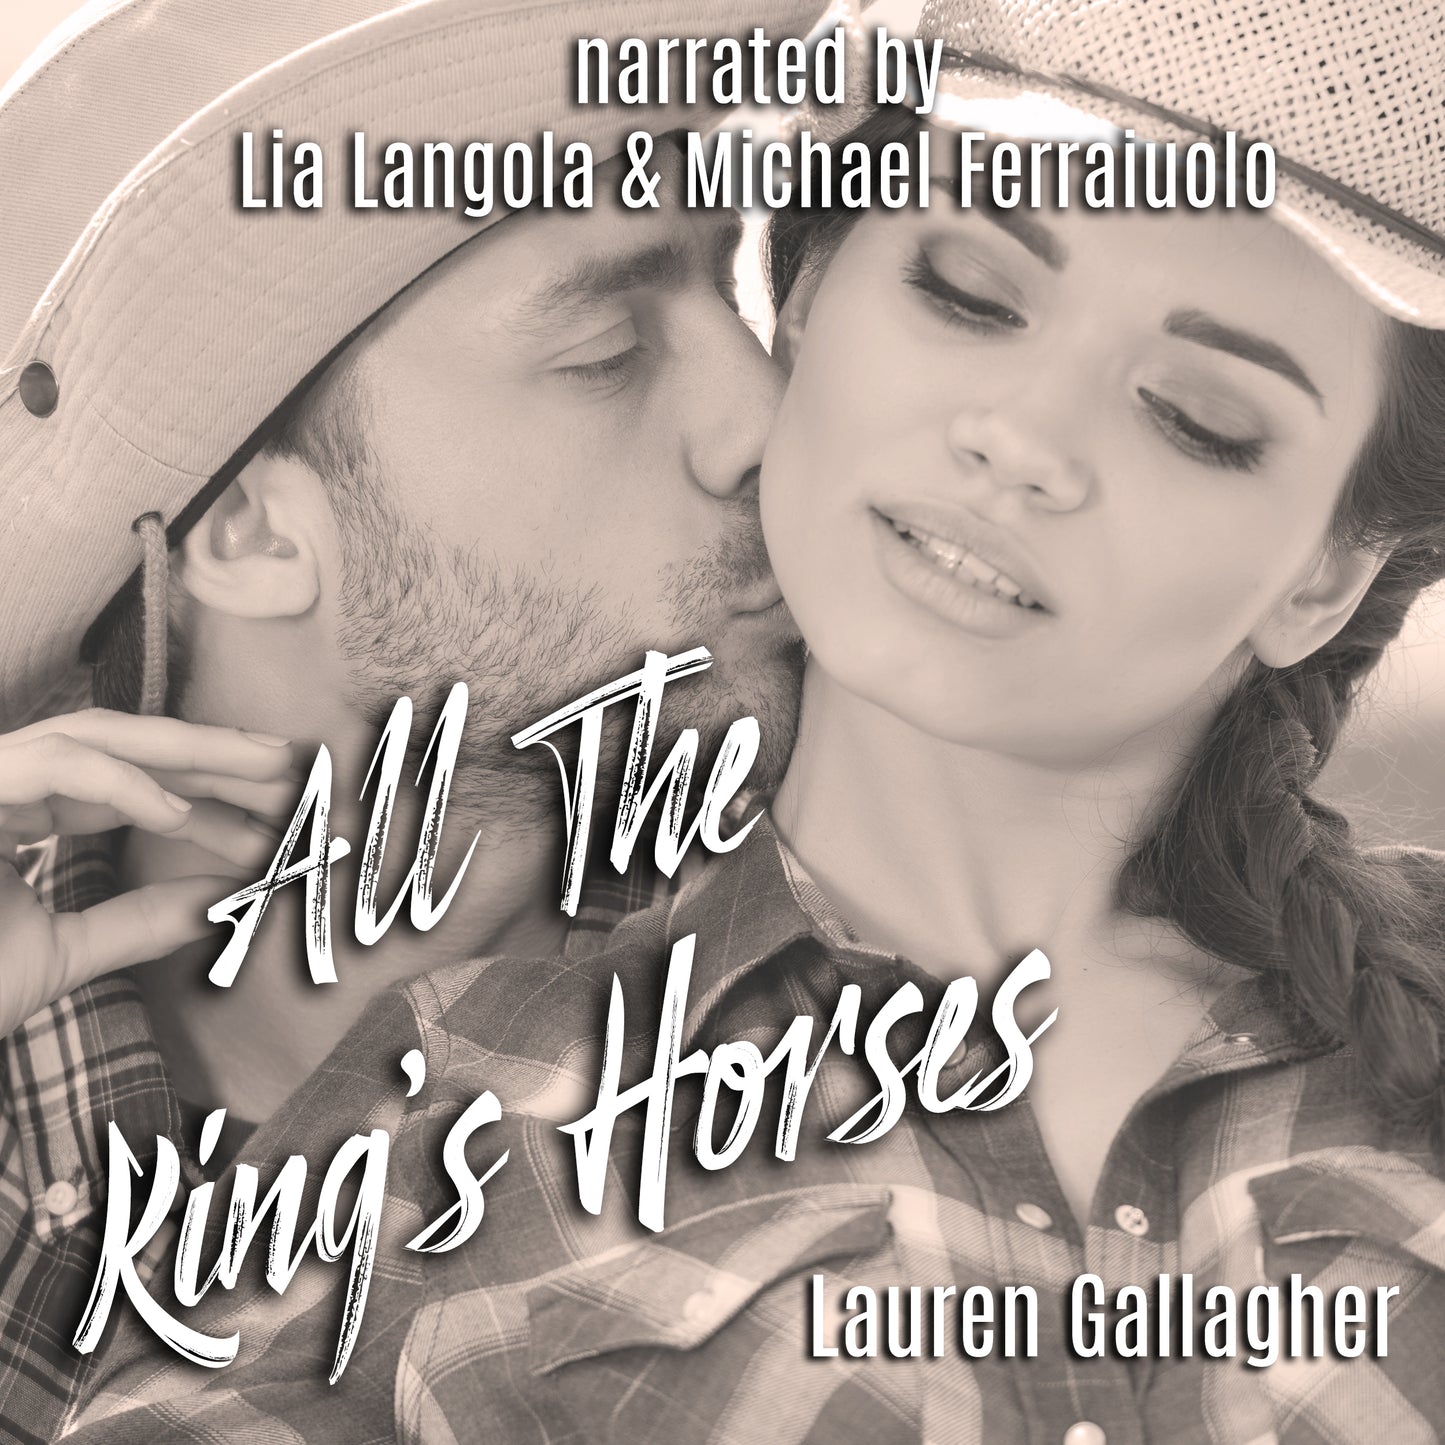 AUDIOBOOK: All The King's Horses